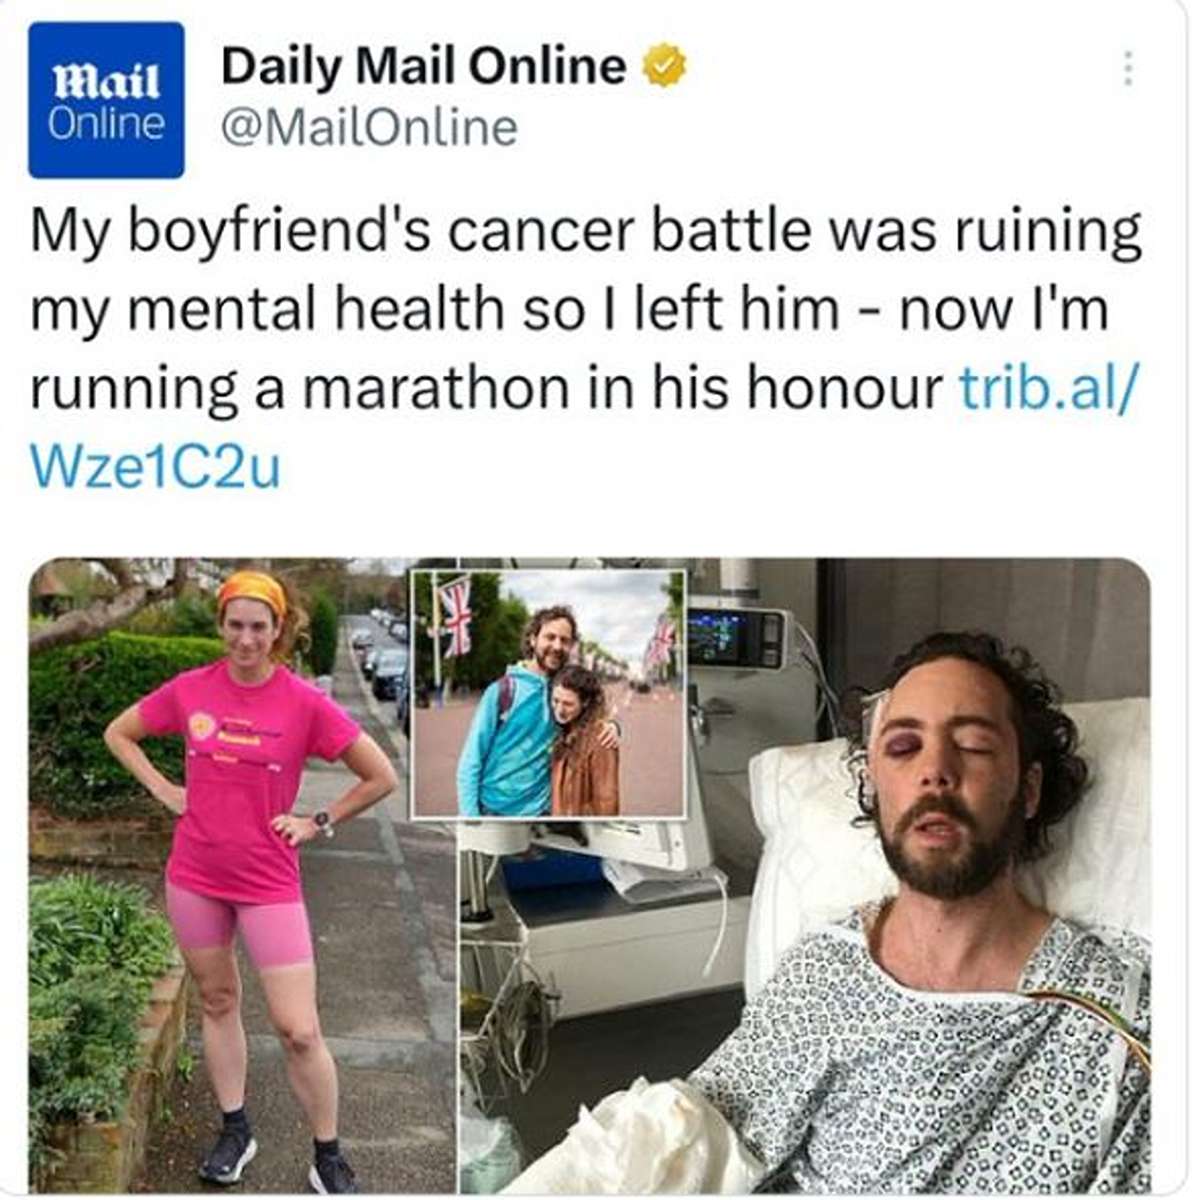 delusional people - my boyfriend's cancer battle was ruining my mental health so i left him now i m running a marathon in his honour - Mail Daily Mail Online Online My boyfriend's cancer battle was ruining my mental health so I left him now I'm running a 